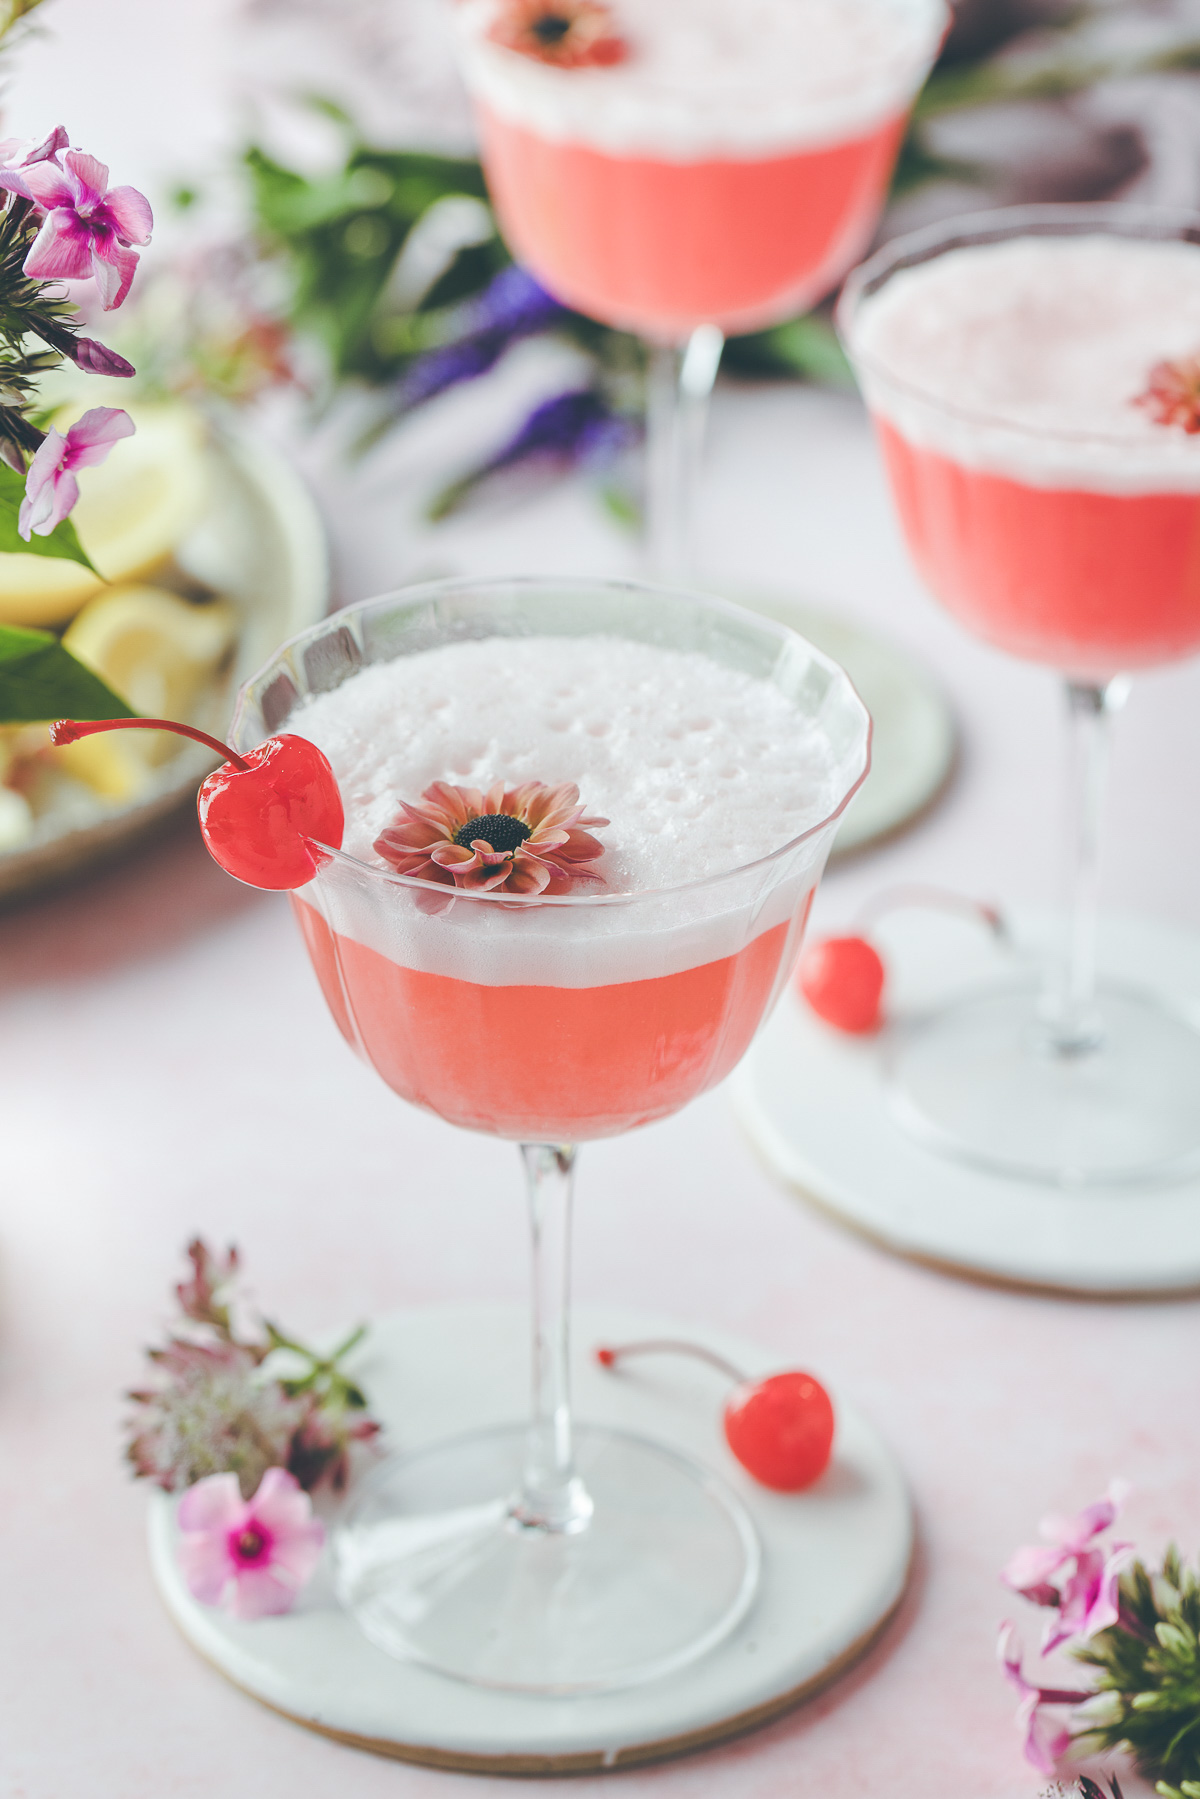 Three lovely pink lady cocktails garnished with bright red cherries and edible flowers. 